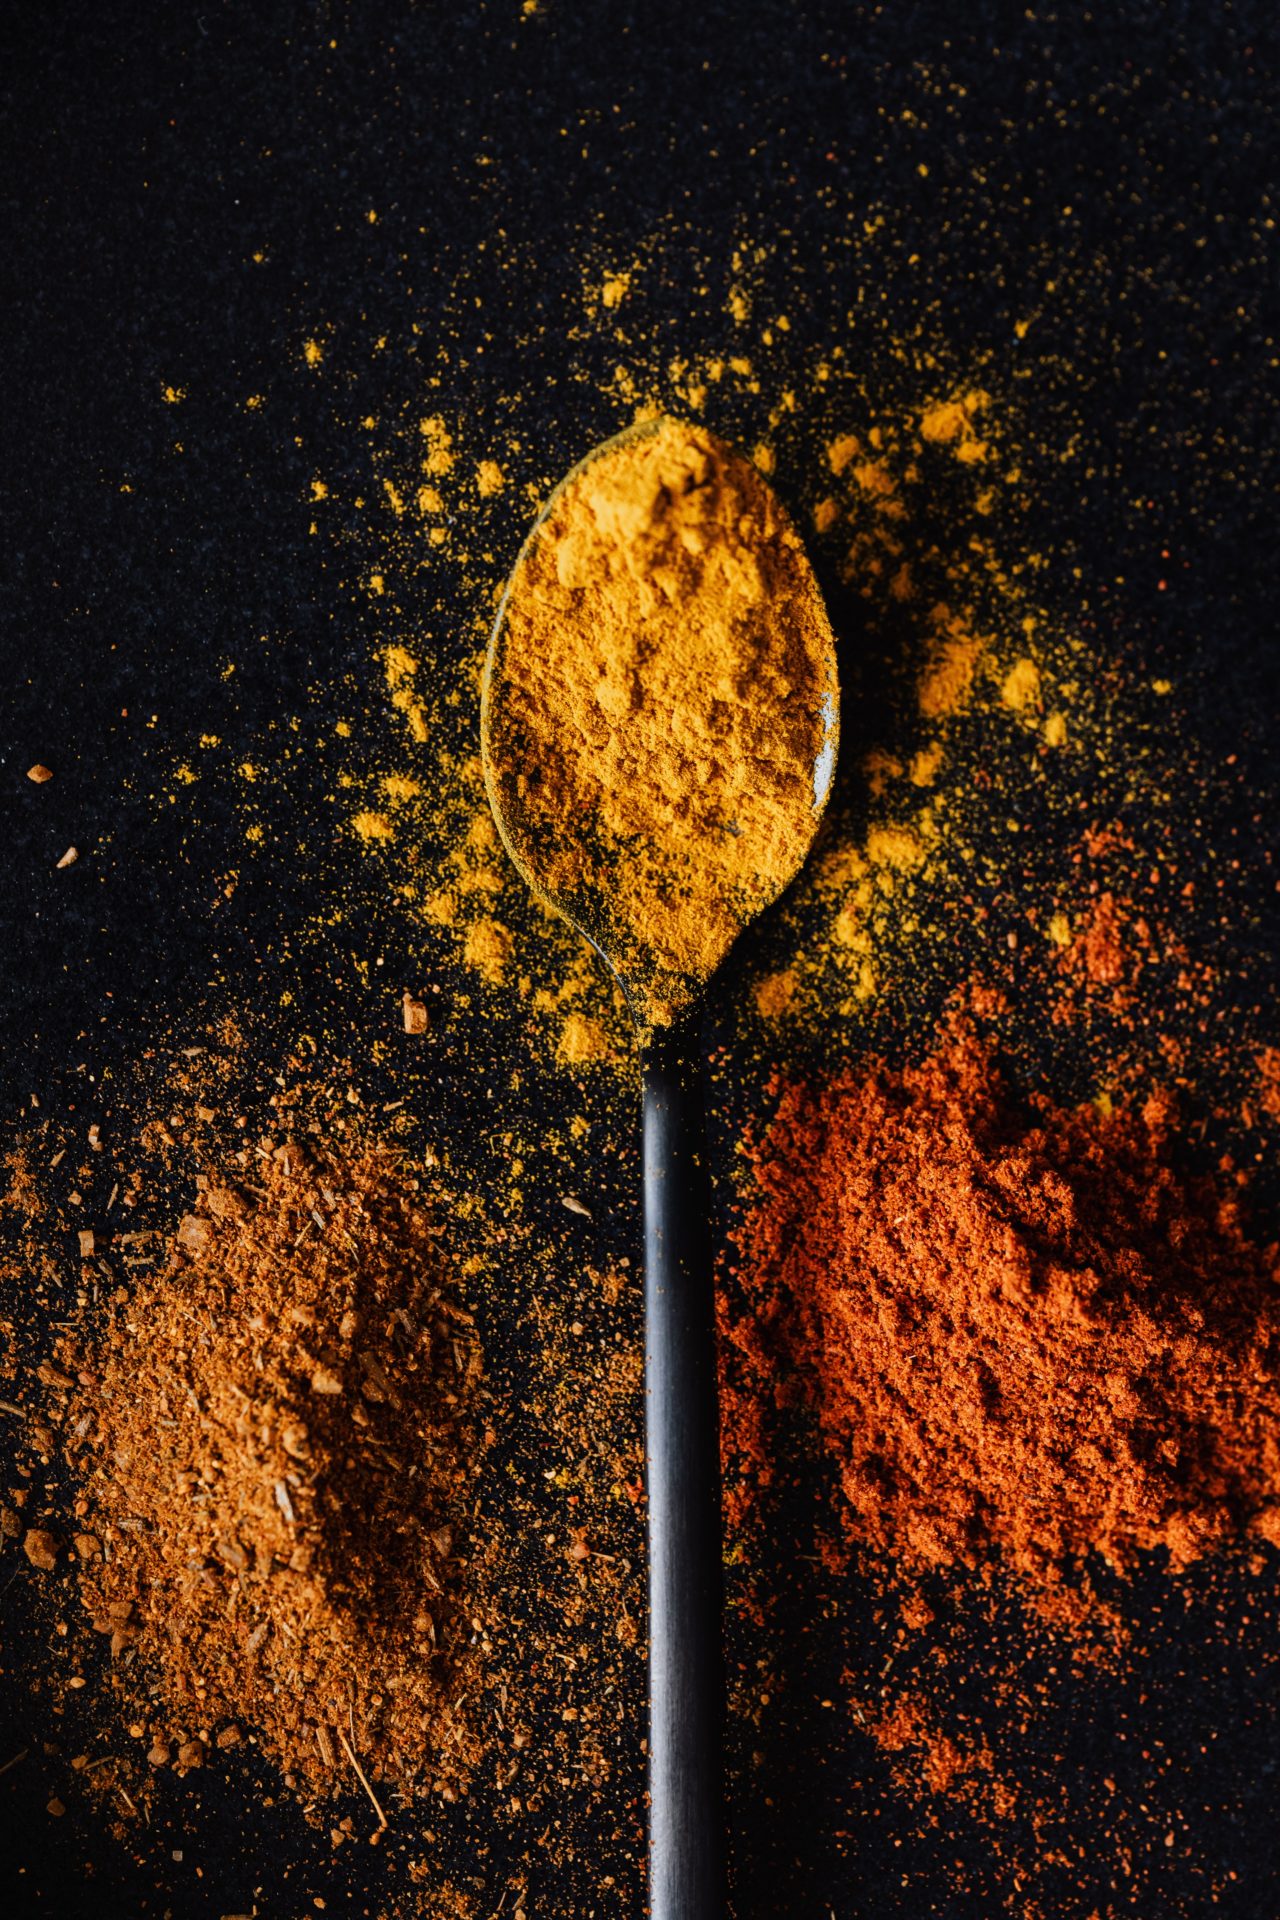 A Spice to Beware? The Guide on Medication Interactions with Turmeric